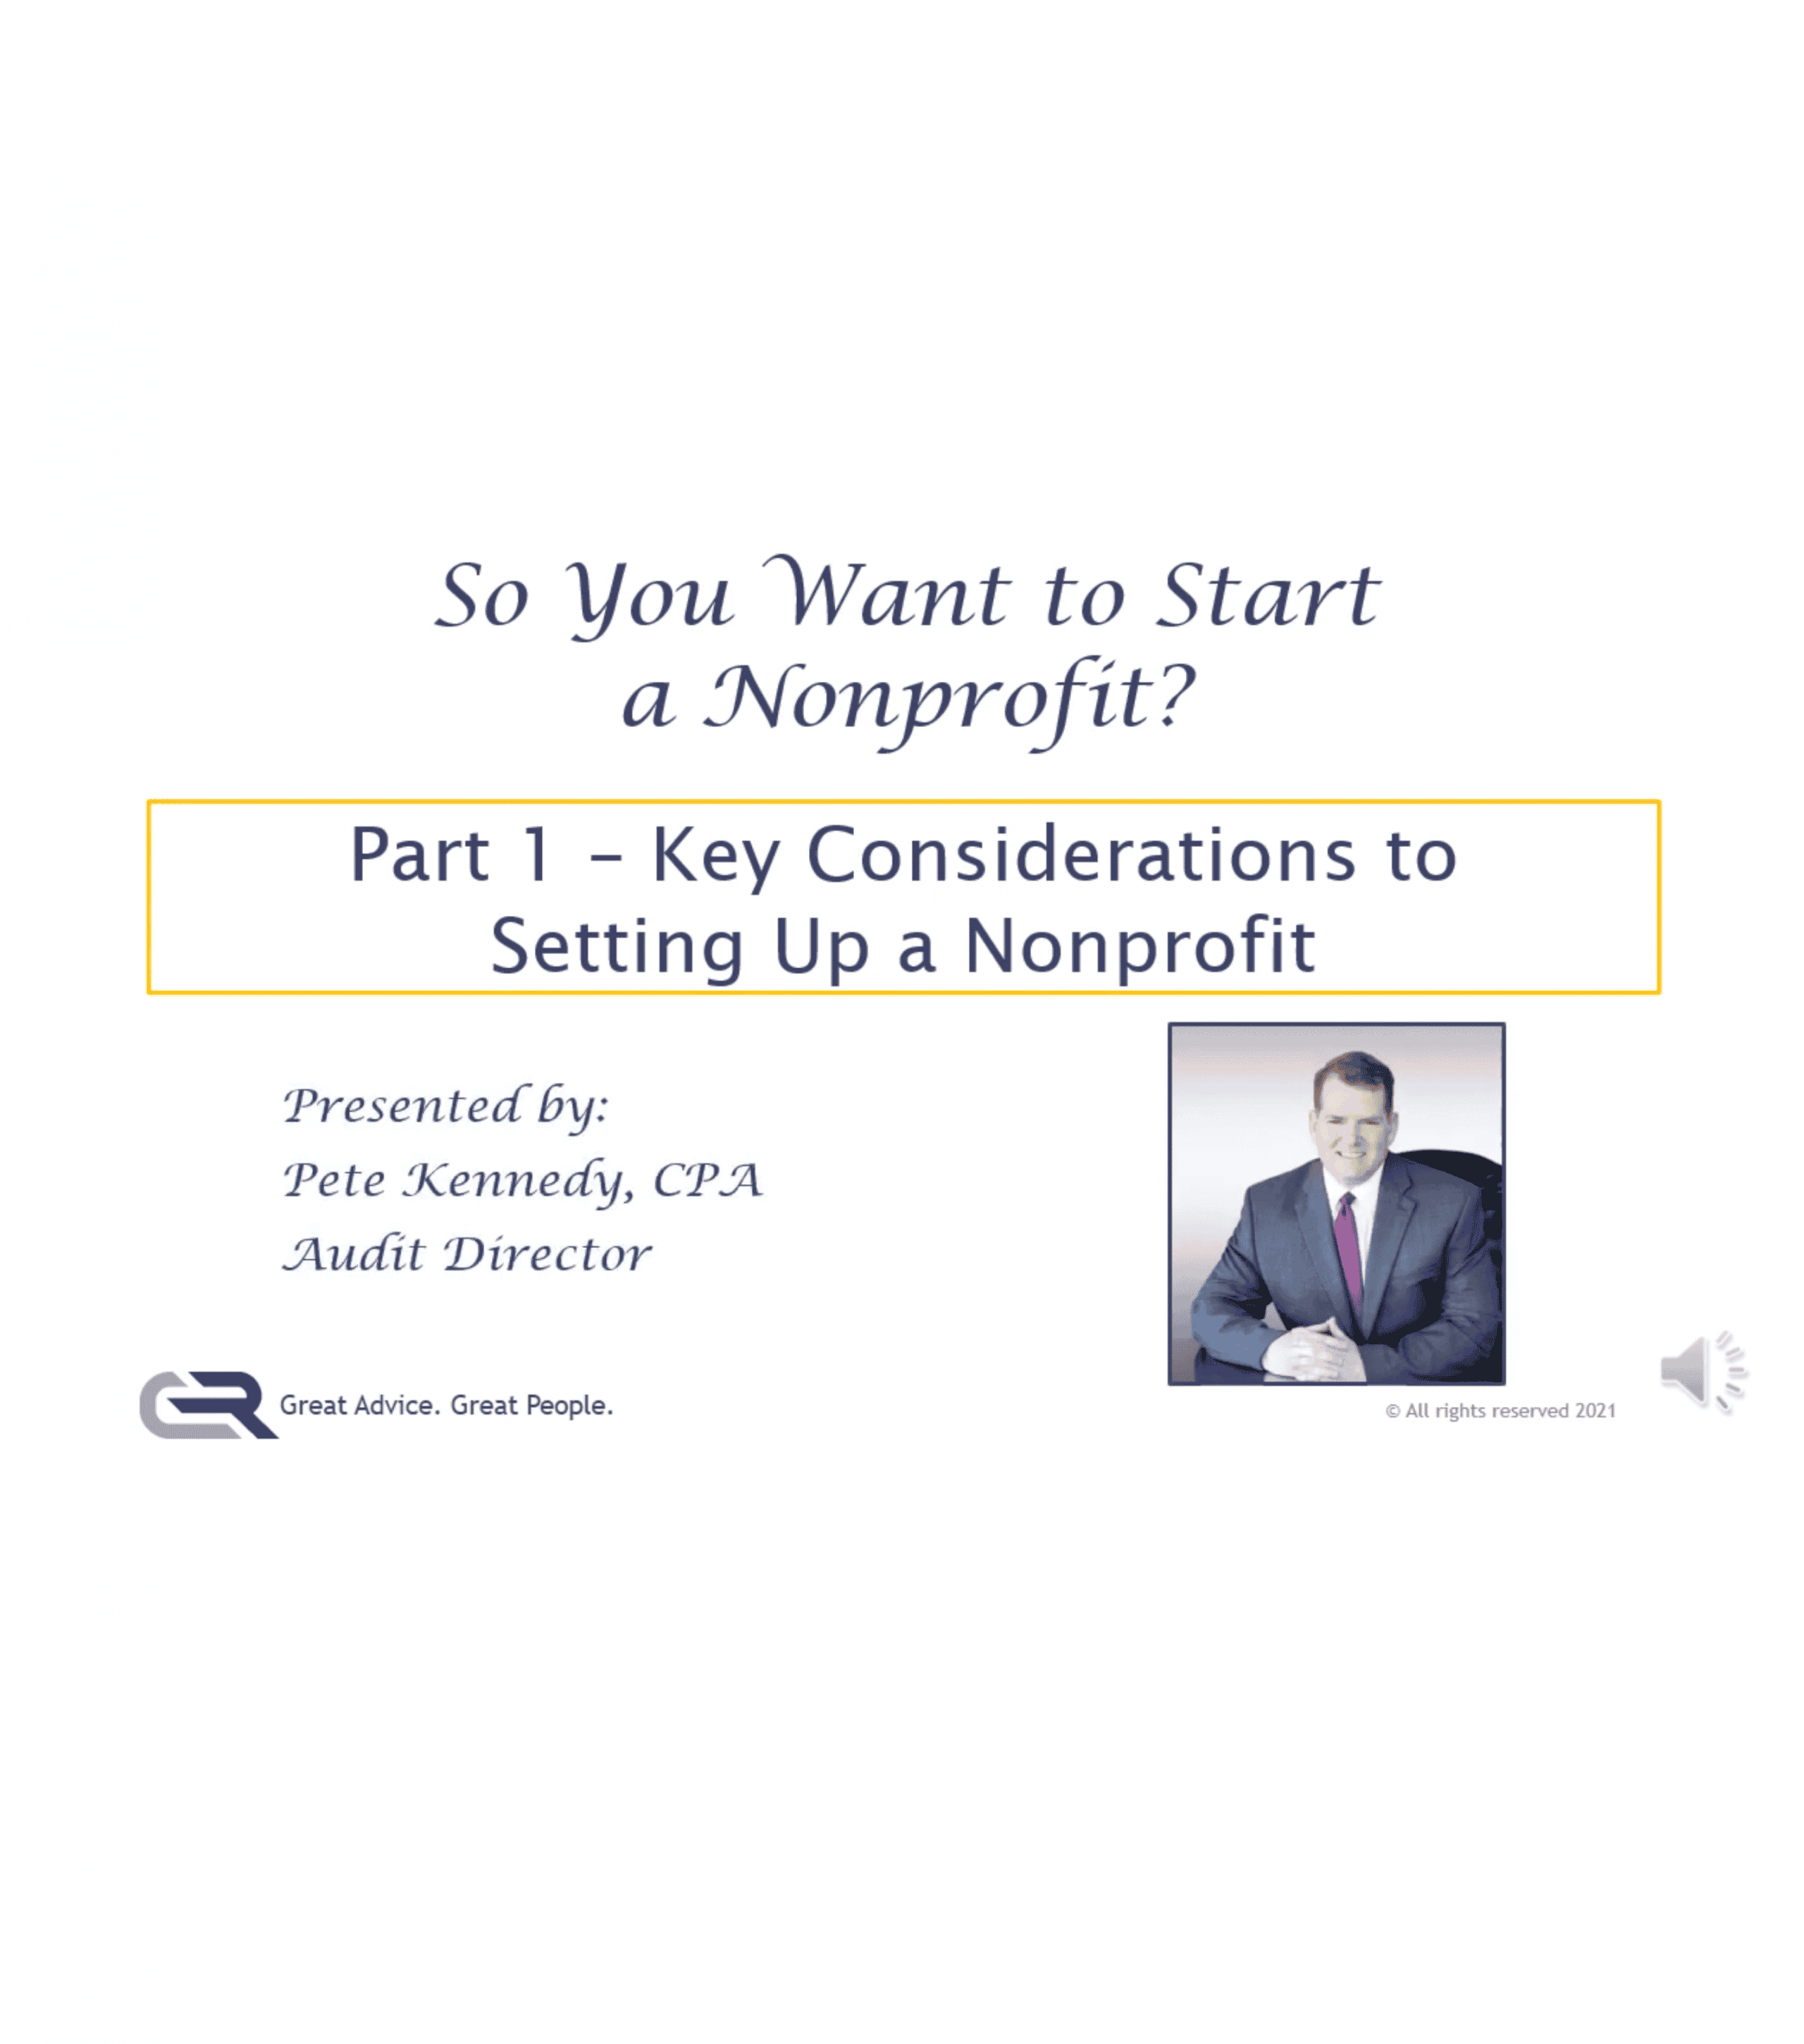 So You Want To Start a Nonprofit - Part 1